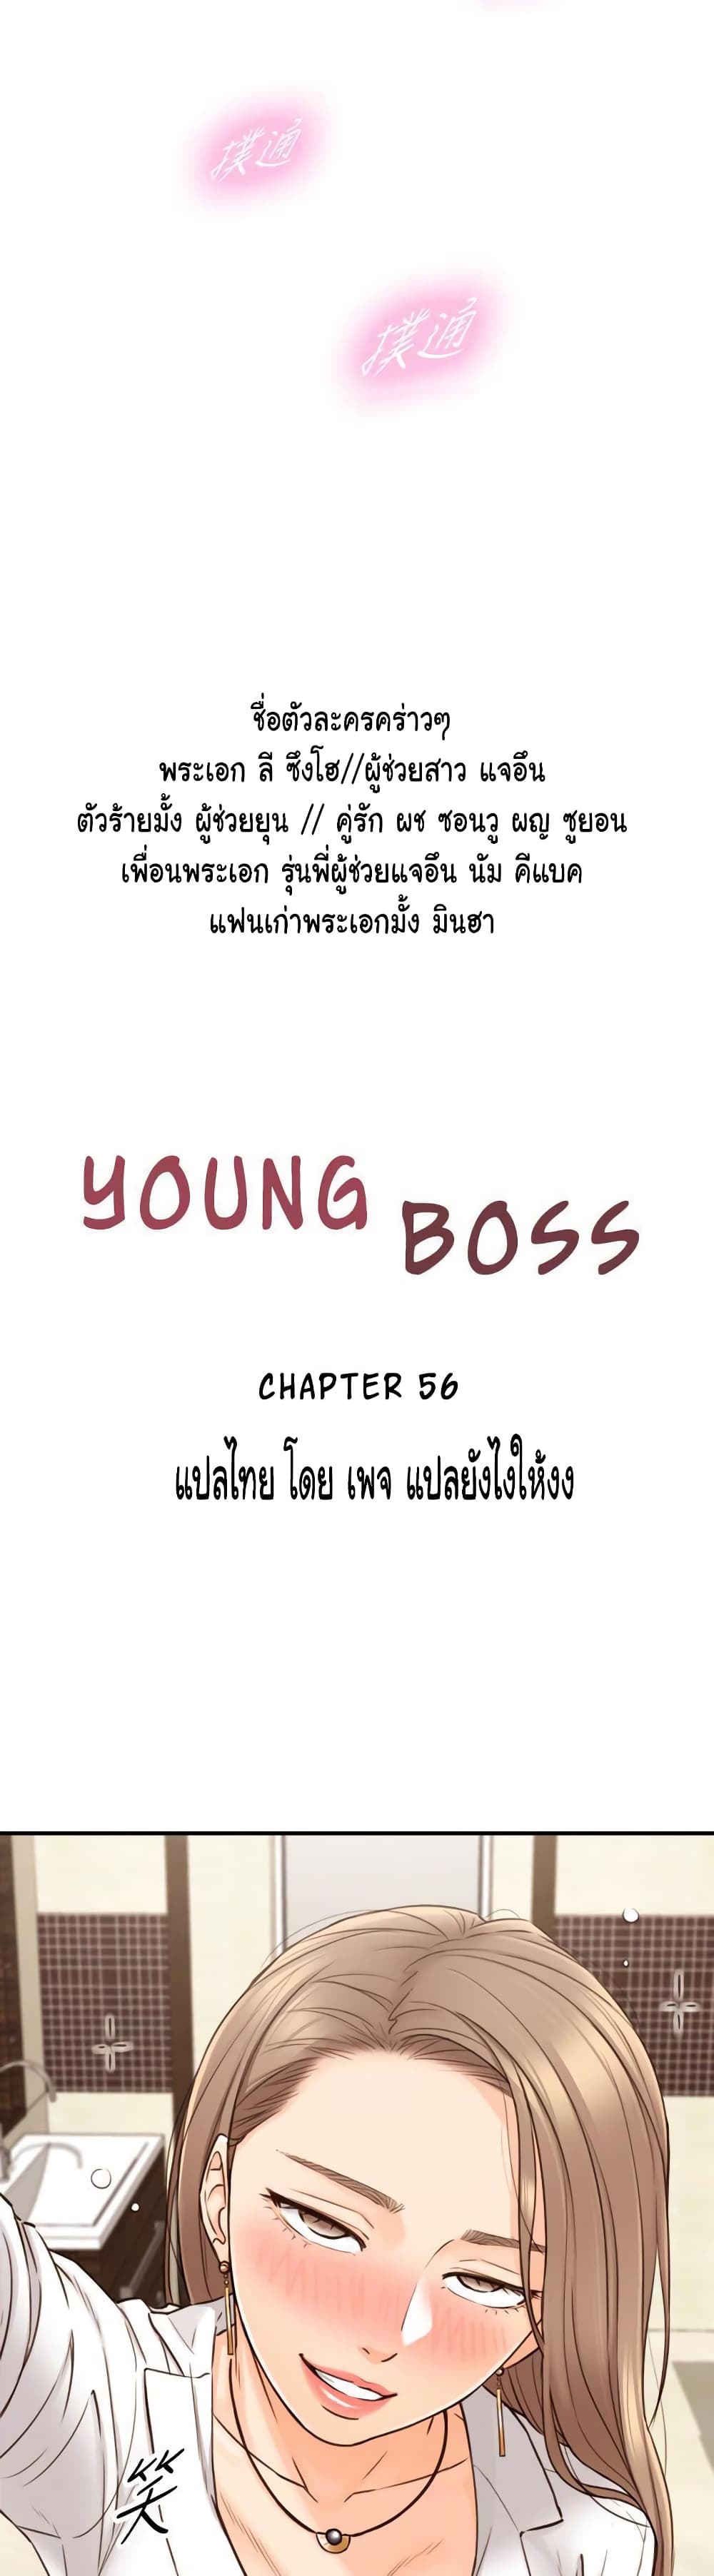 Young Boss 56-56